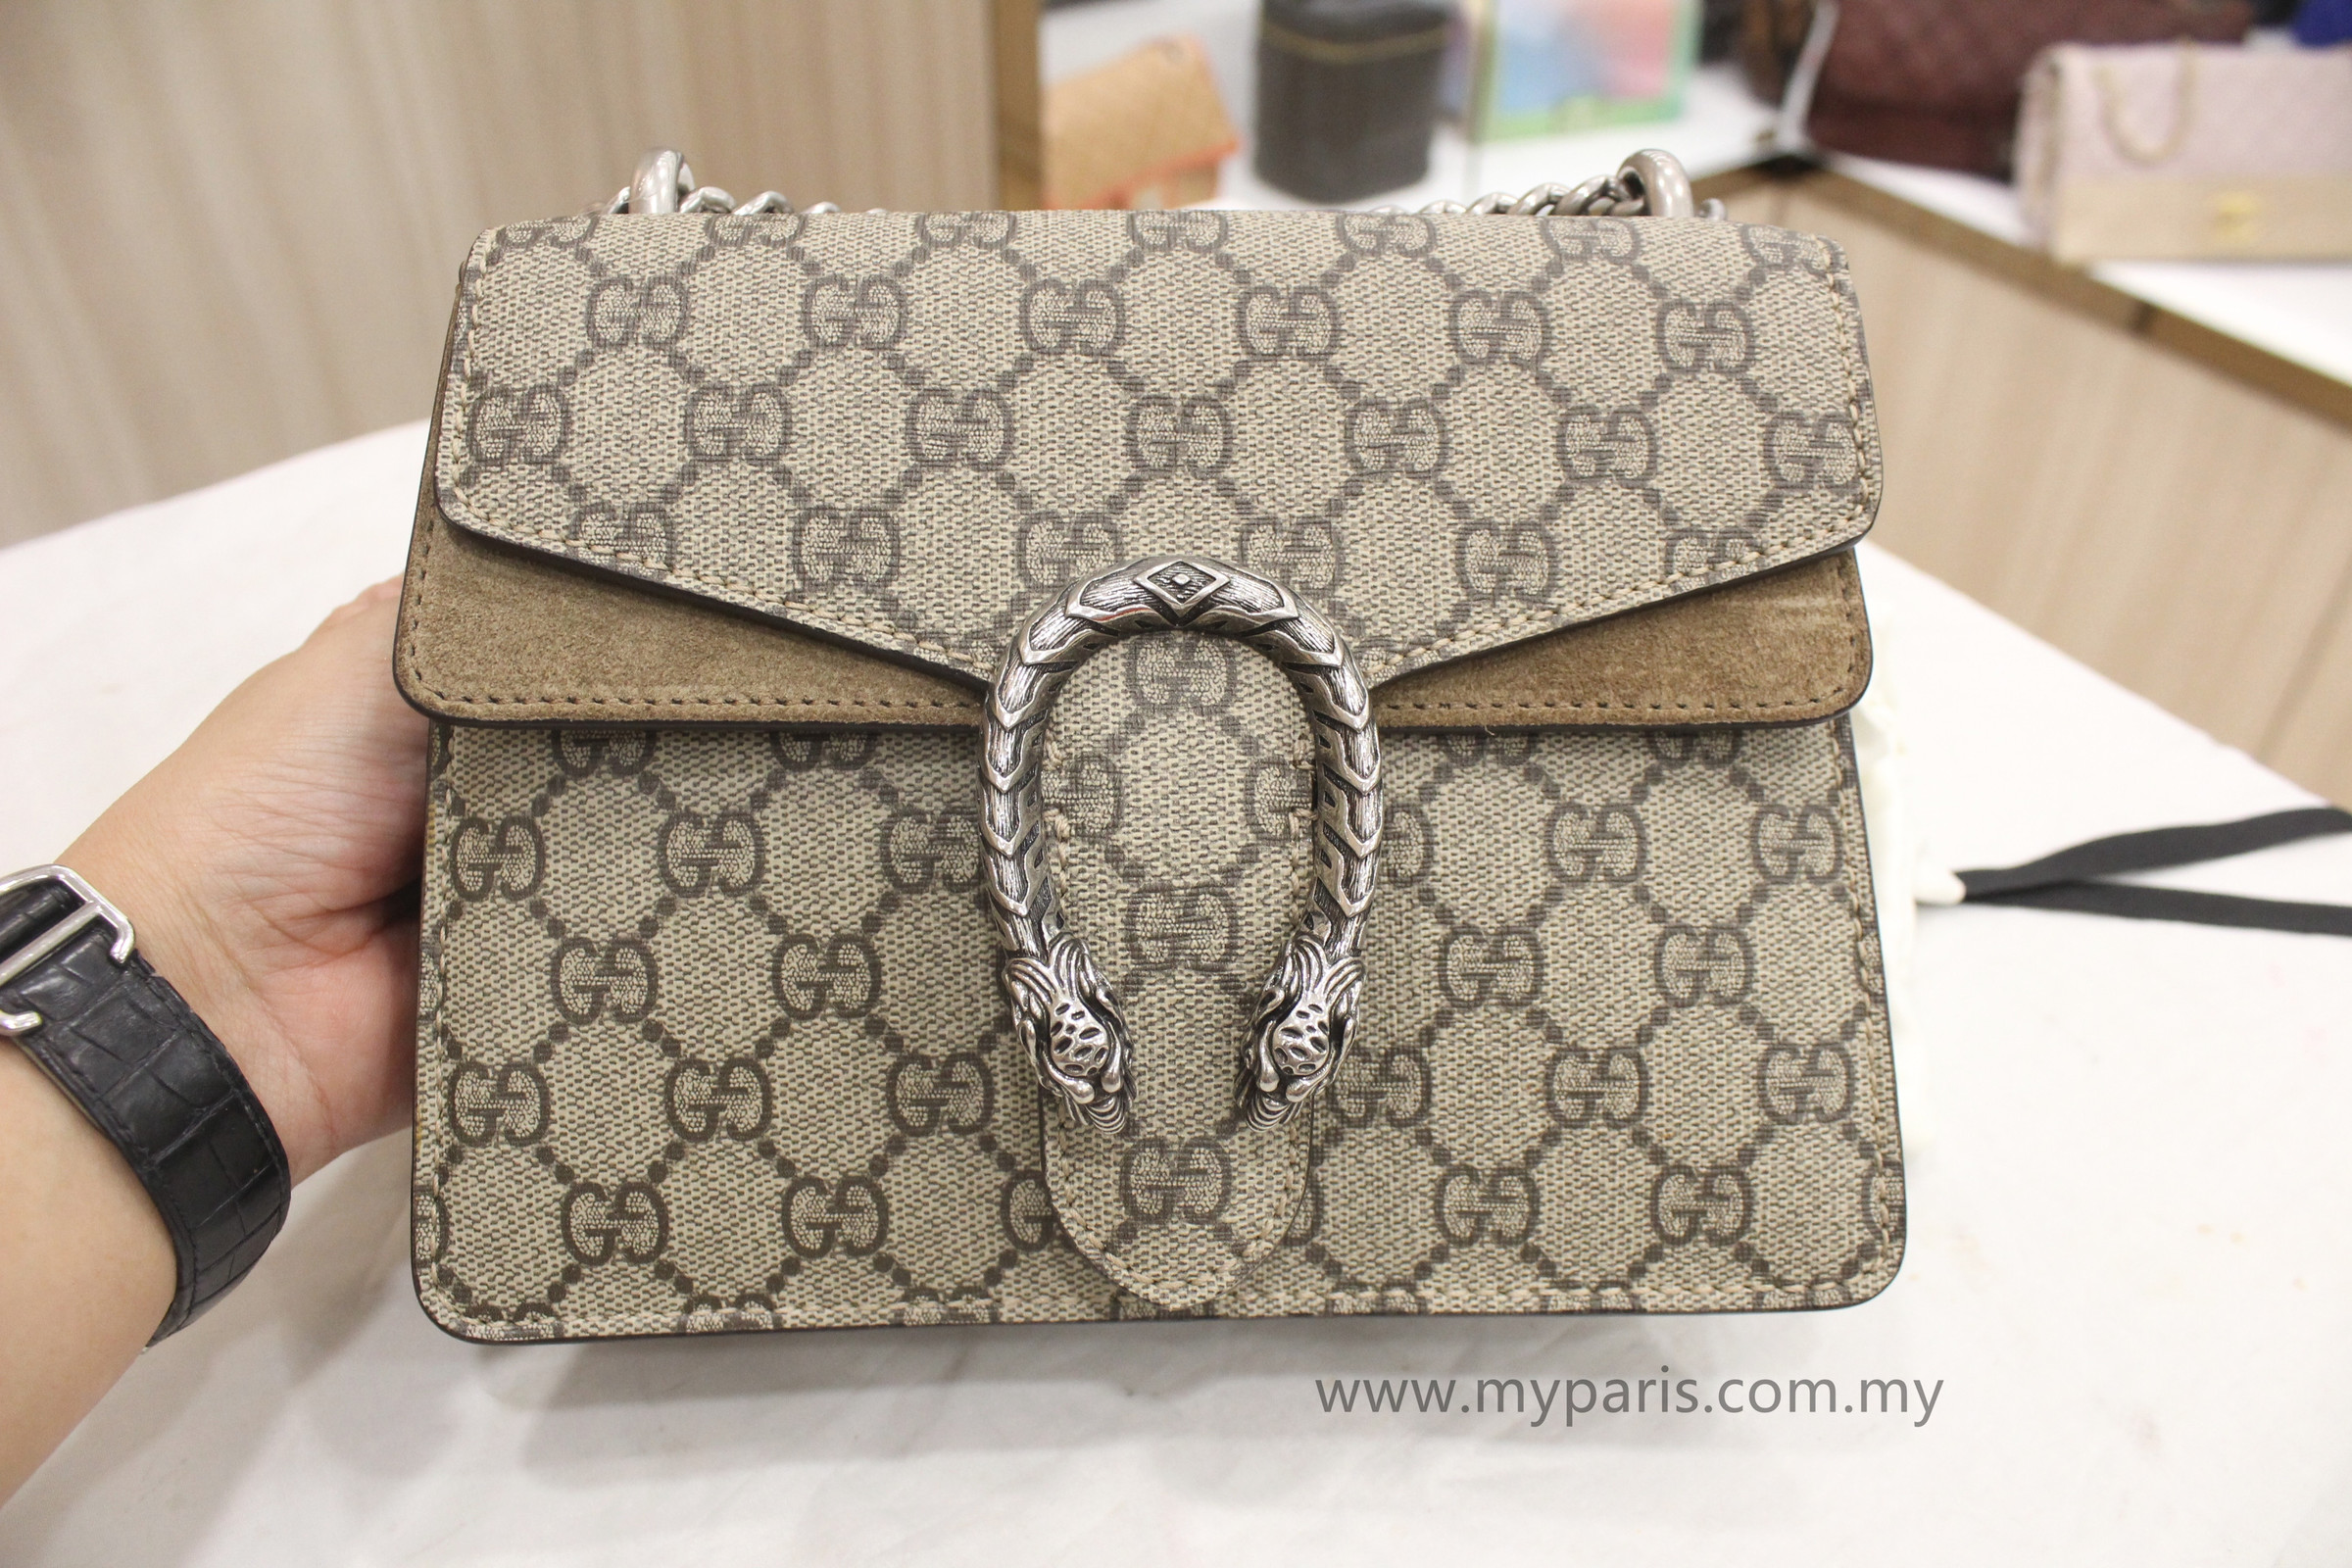 Gucci Dionysus GG Supreme Mini bag – My Paris Branded Station-Sell Your Bags And Get Instant Cash